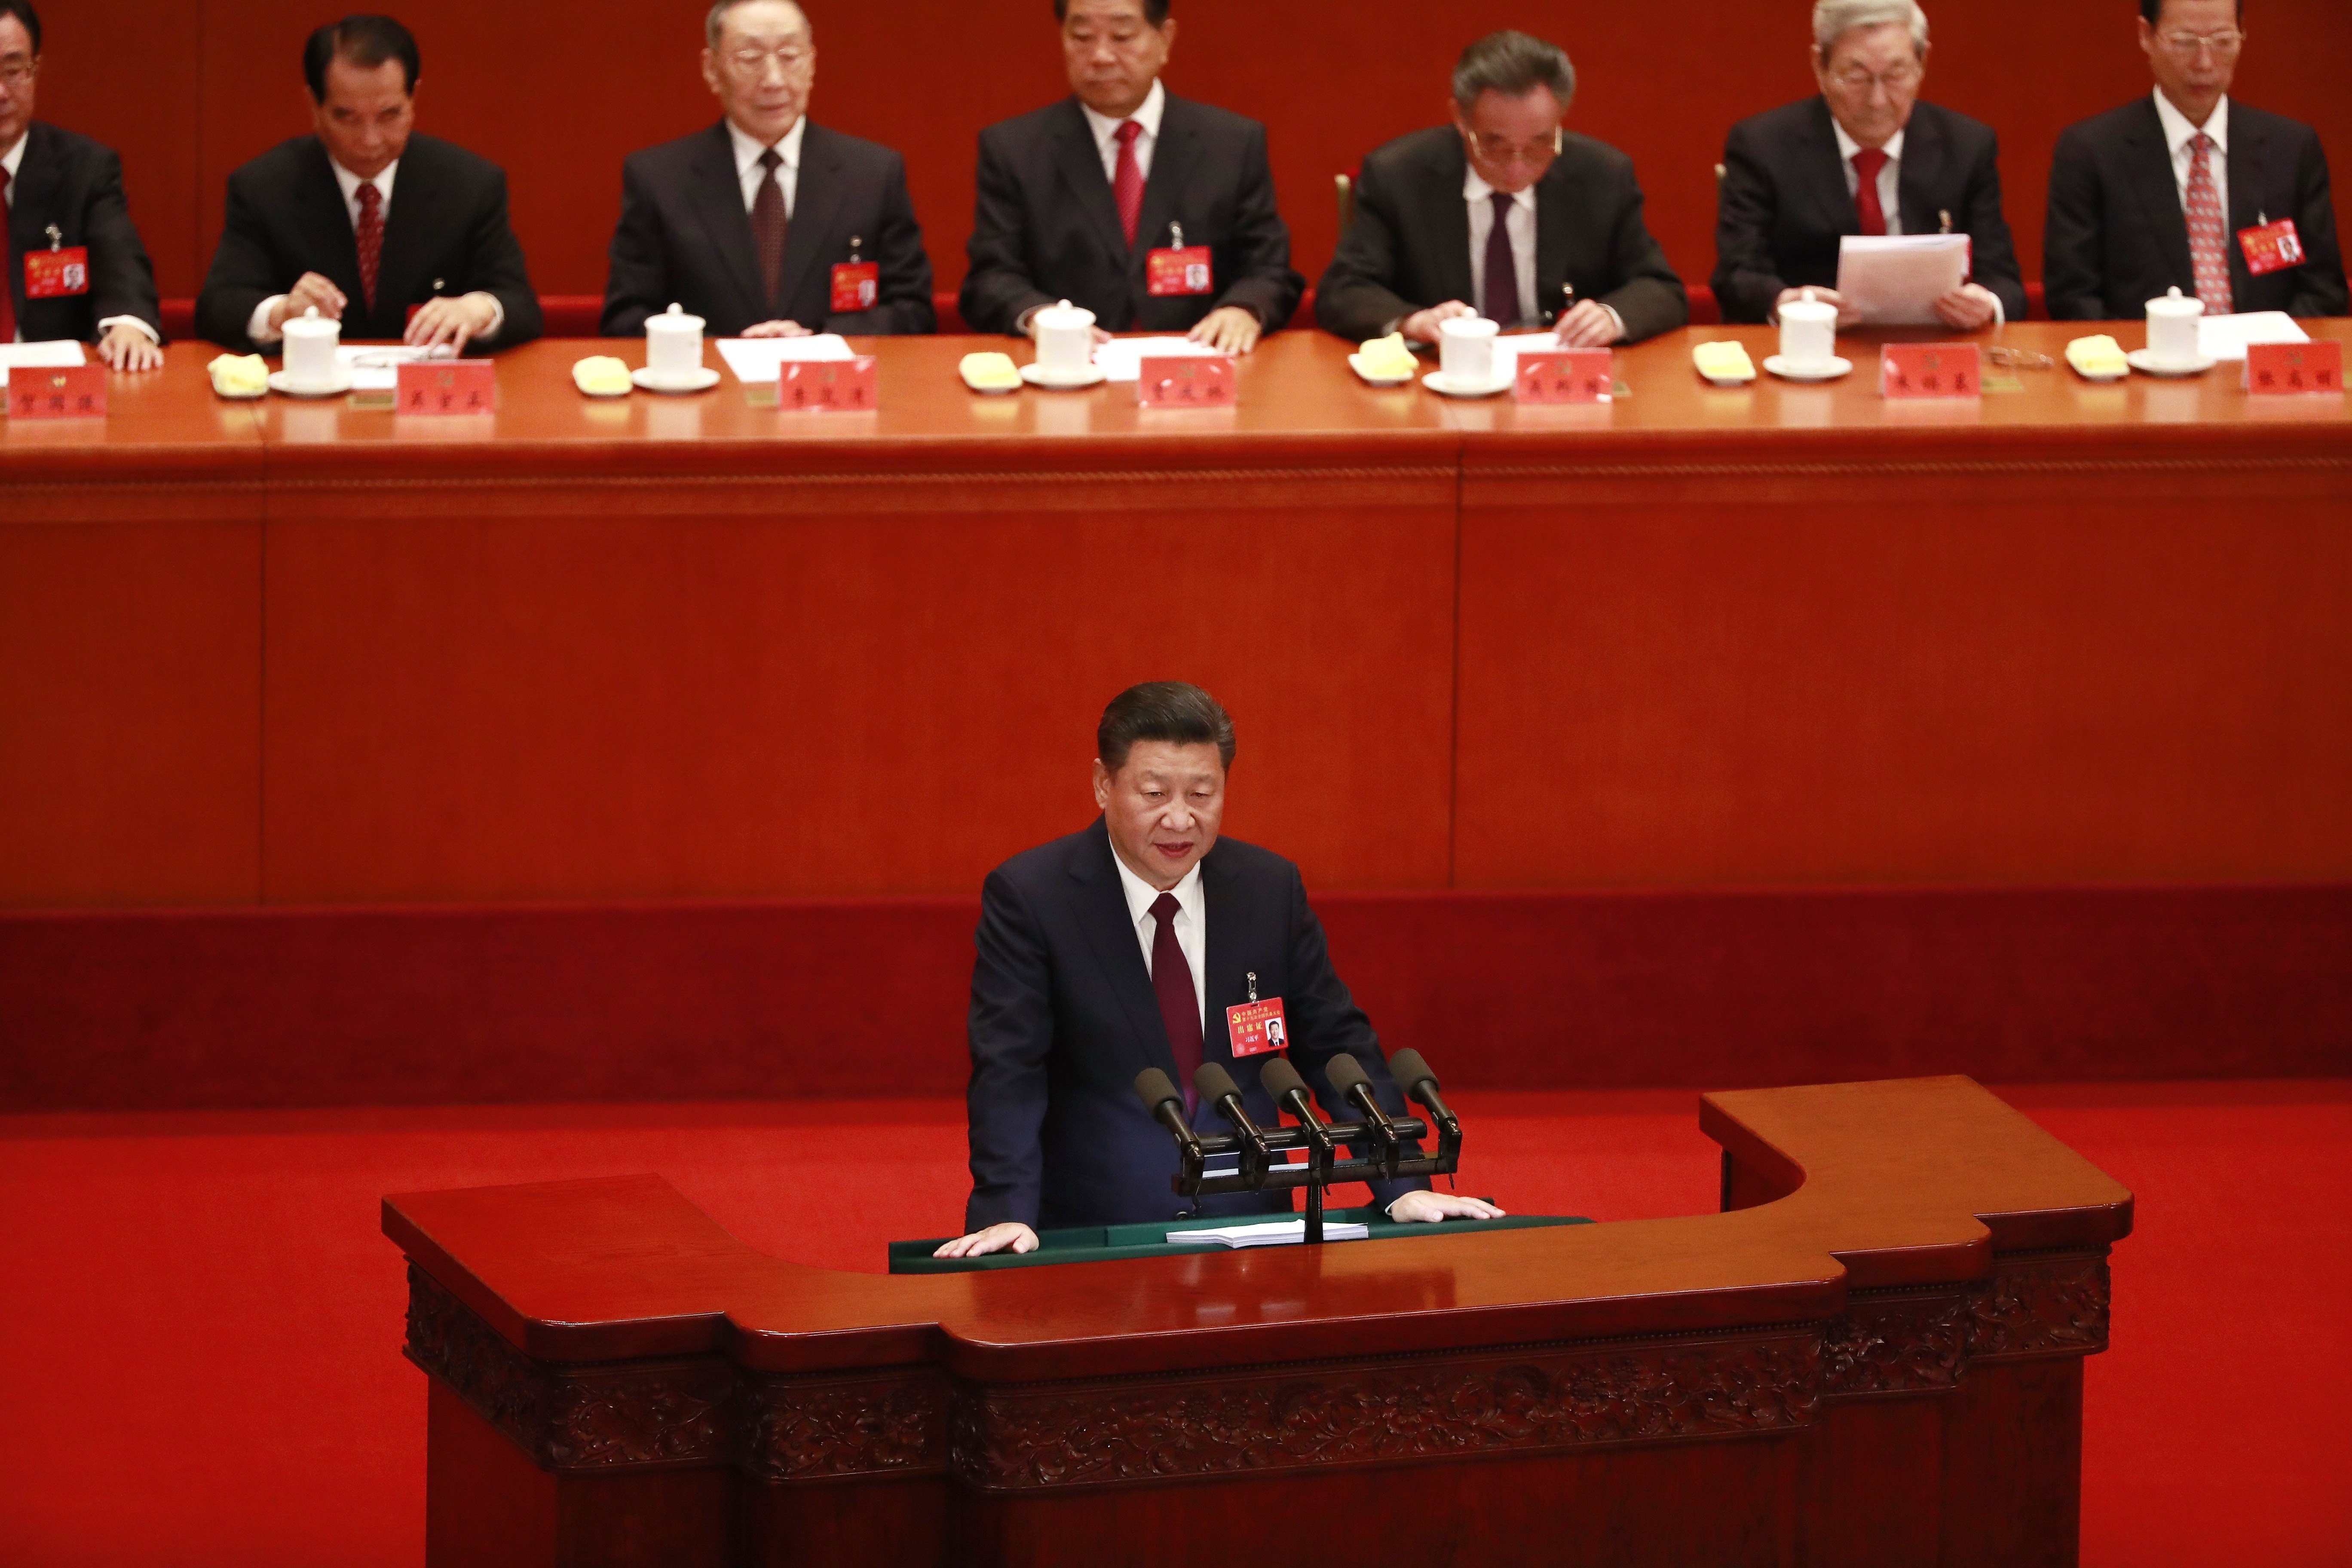 Chinese President Xi Jinping delivers his speech at the opening ceremony of the 19th Communist Party National Congress in Beijing last October 18. Photo: EPA-EFE